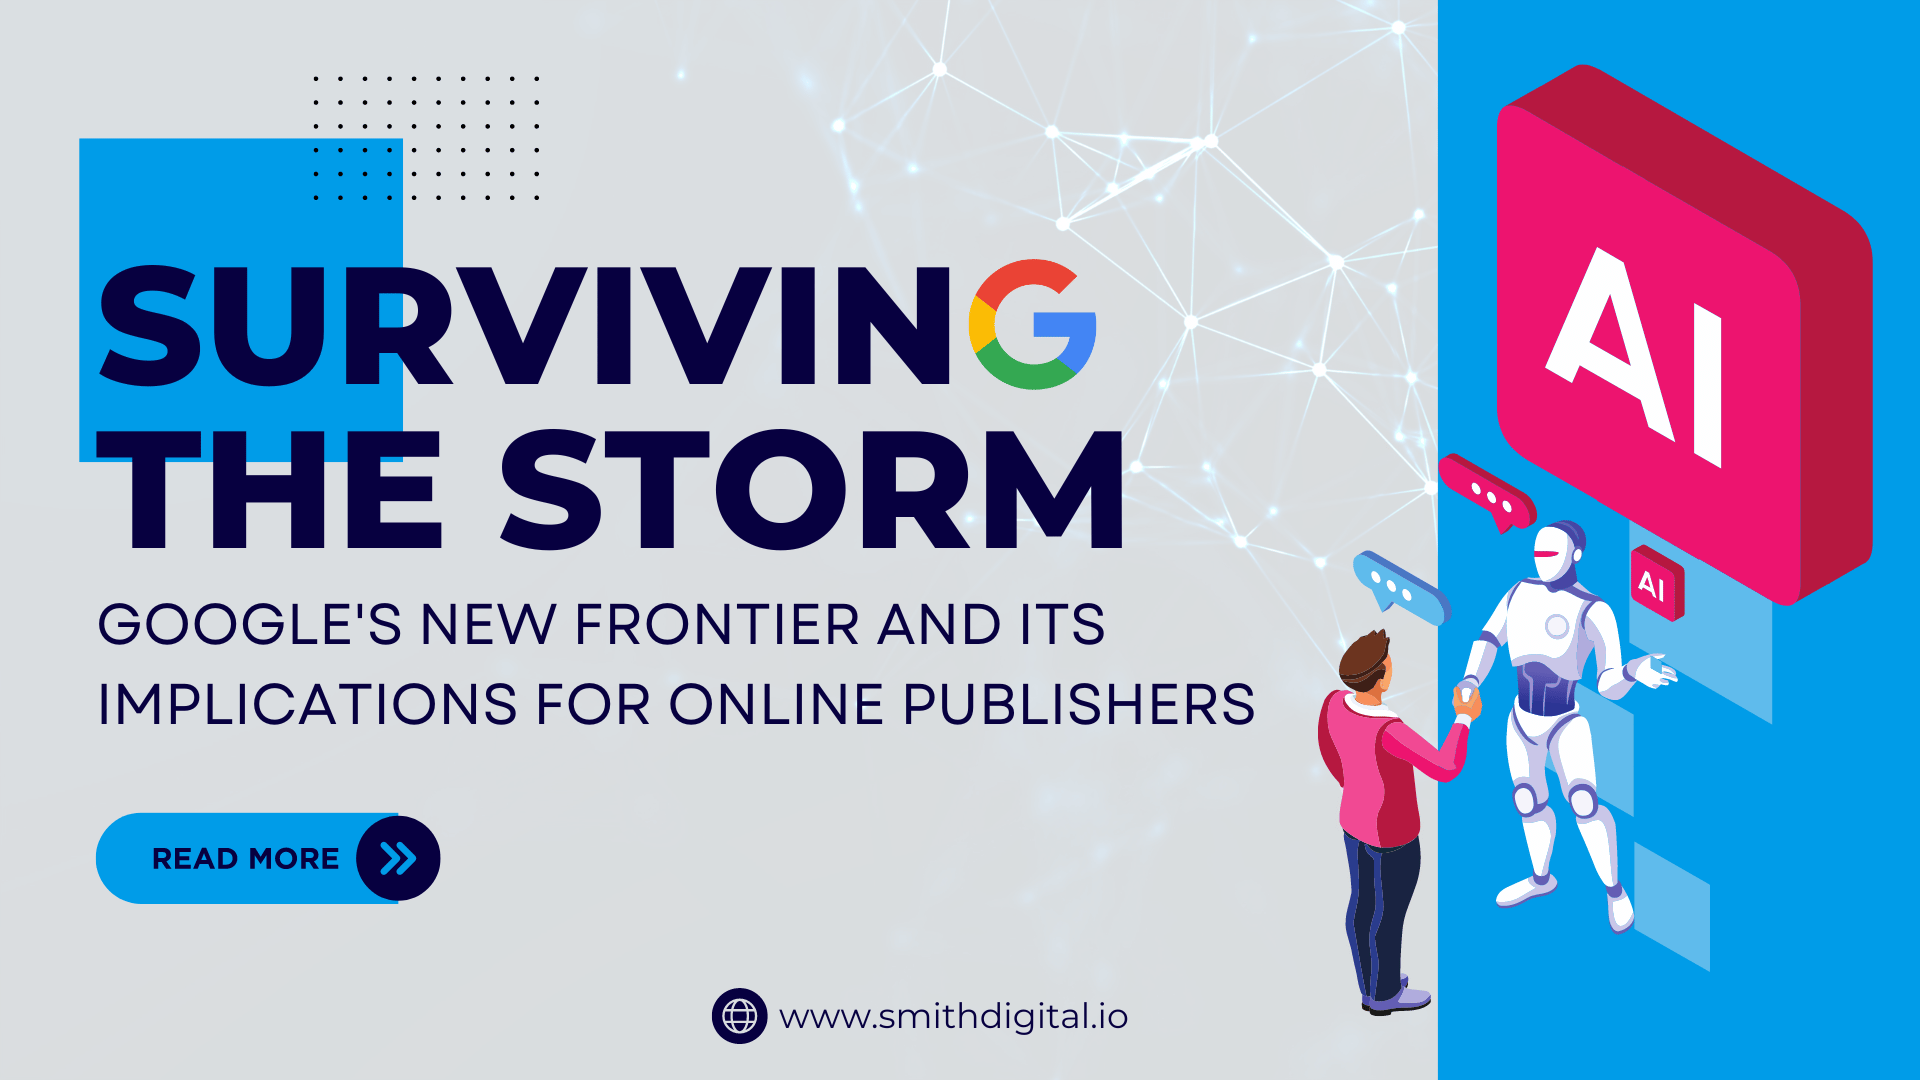 Surviving the Storm: Google's New Frontier and its Implications for Online Publishers